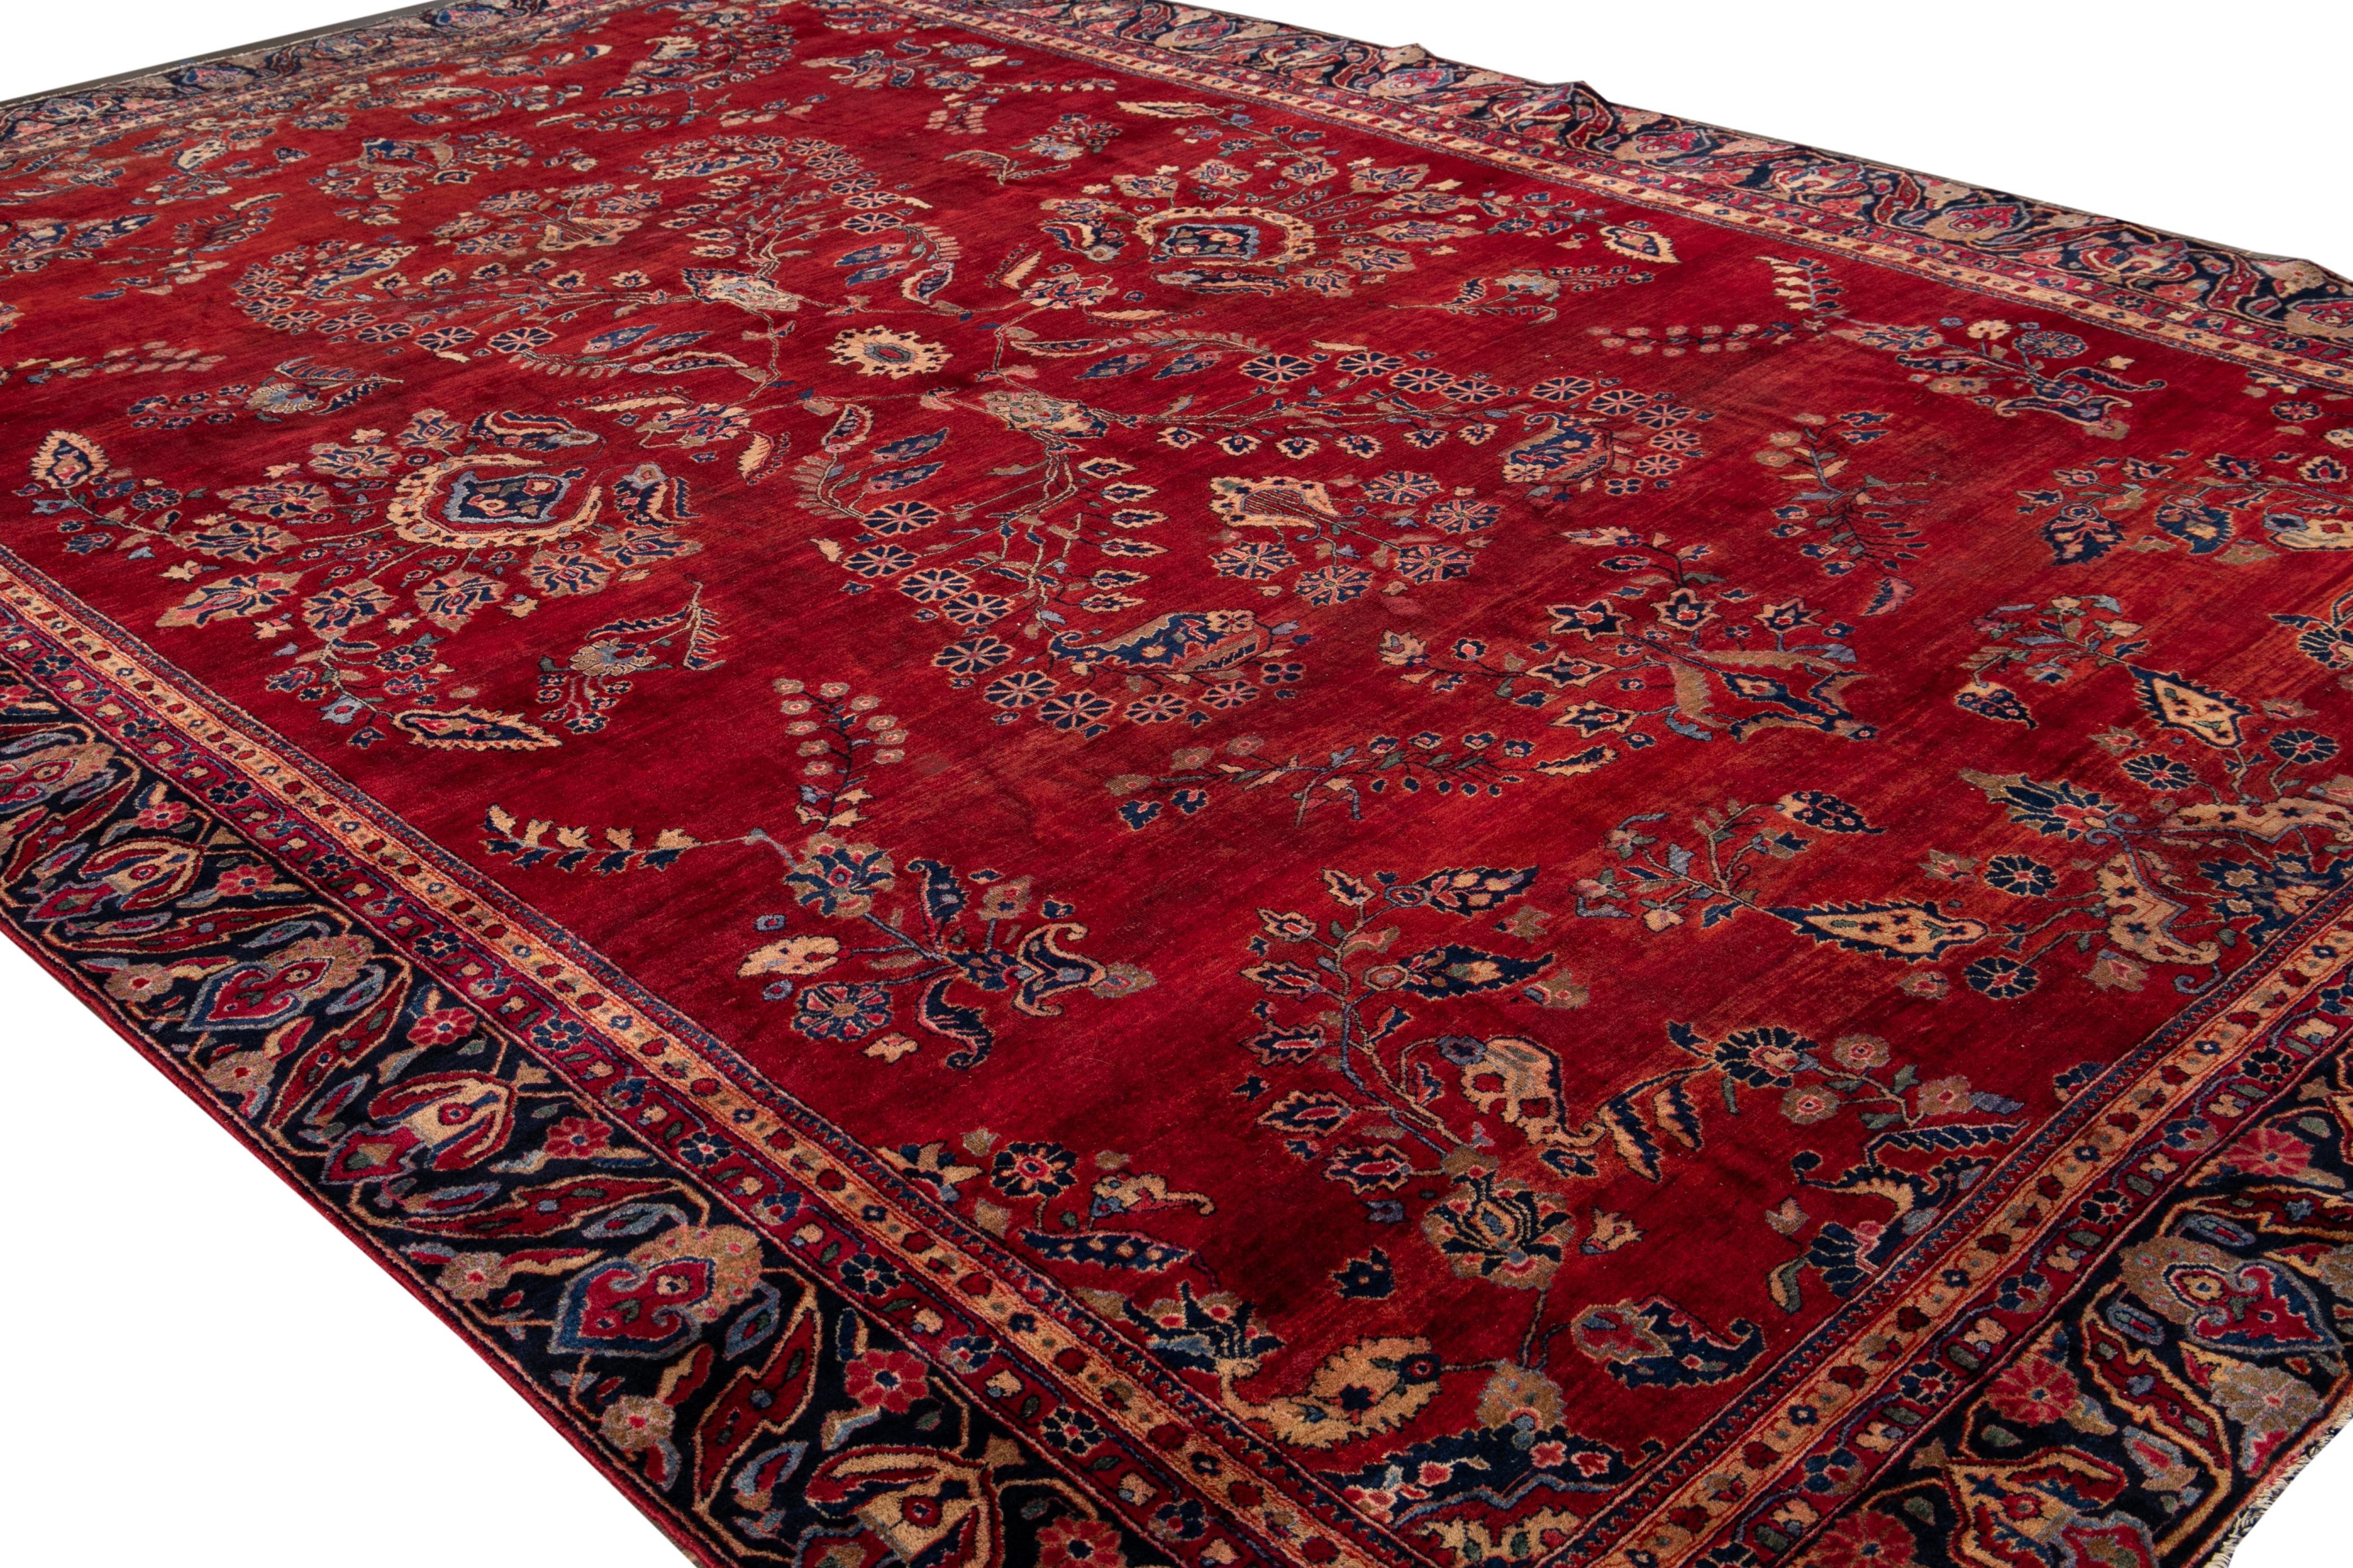 20th Century Red Antique Persian Sarouk Wool Rug Handmade with Classic Floral Design For Sale